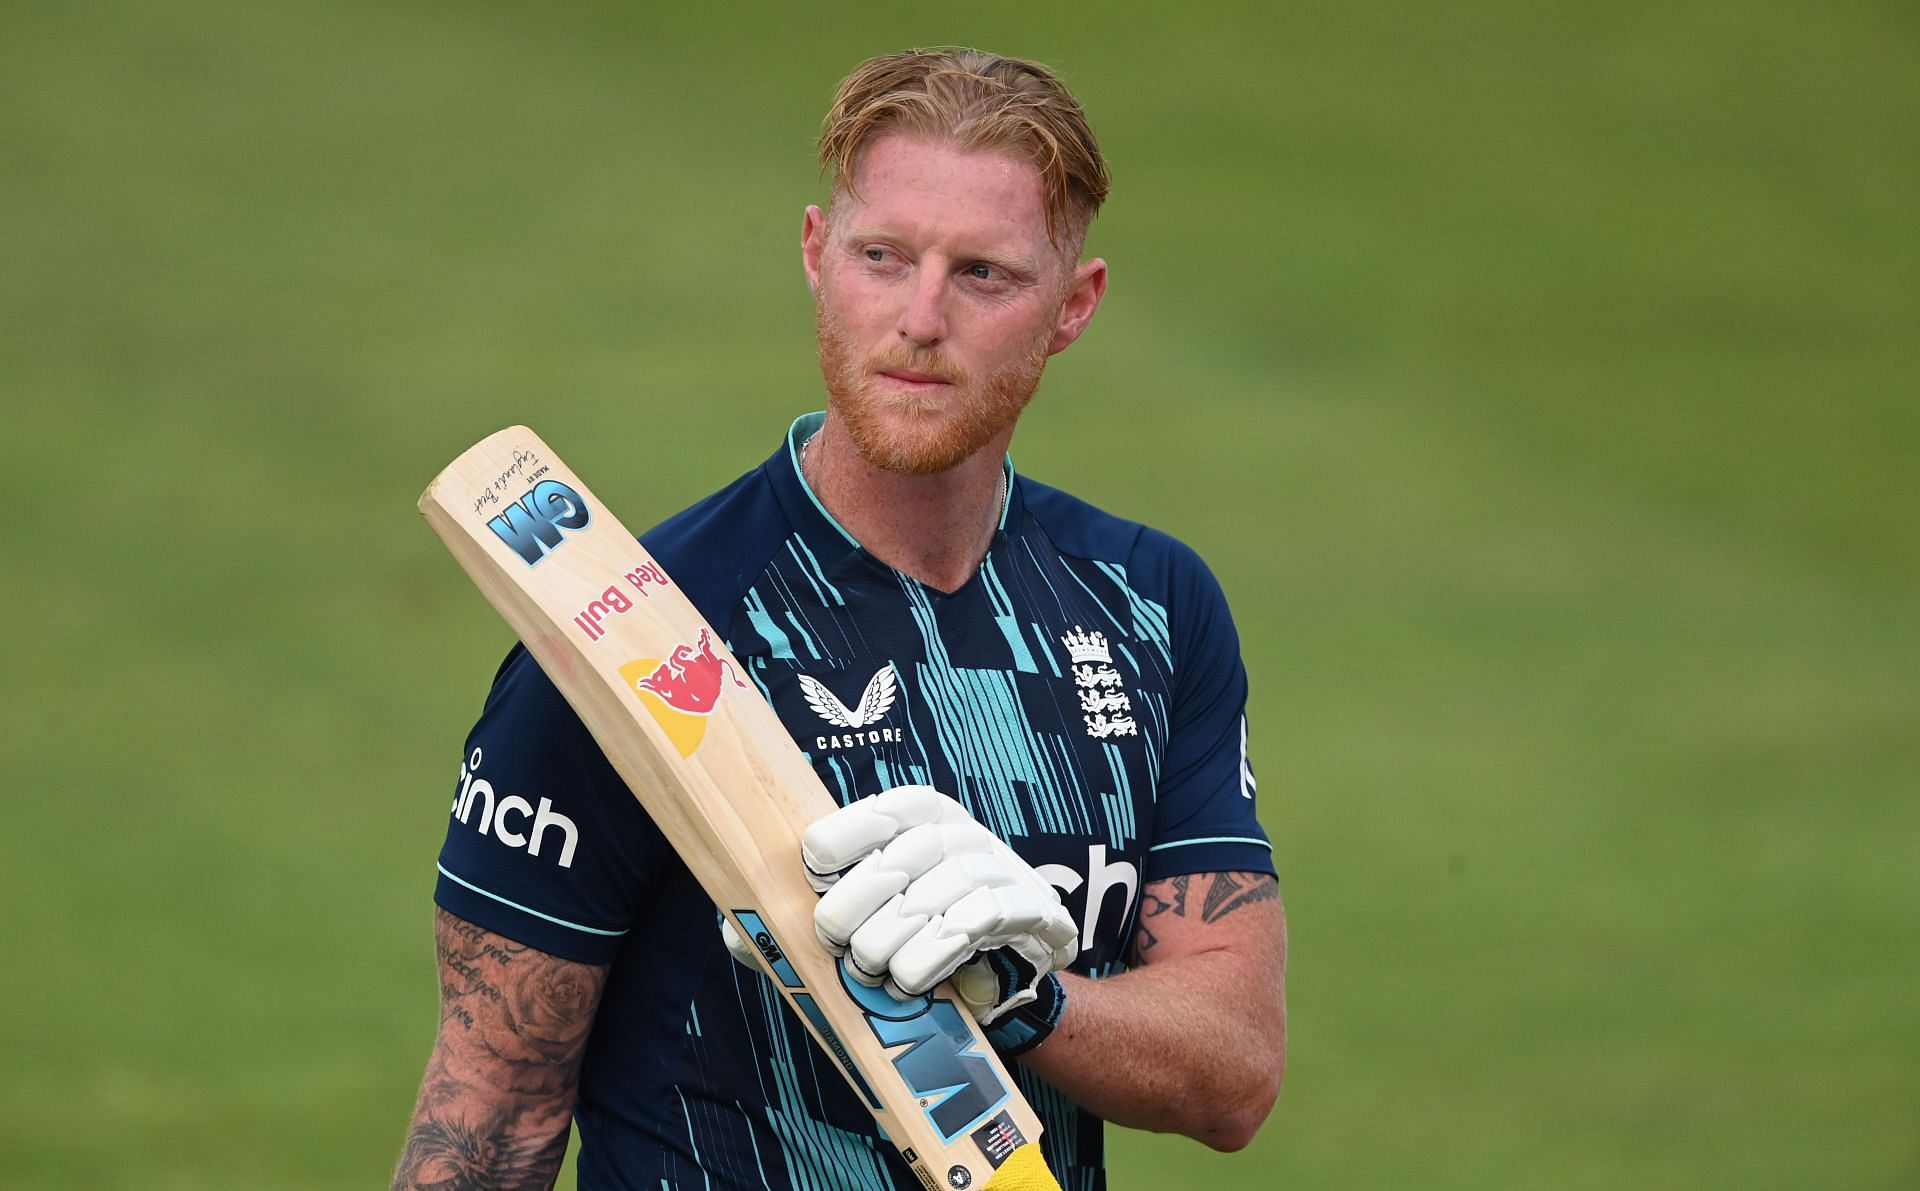 Ben Stokes bid adieu to ODI cricket after the first game against South Africa